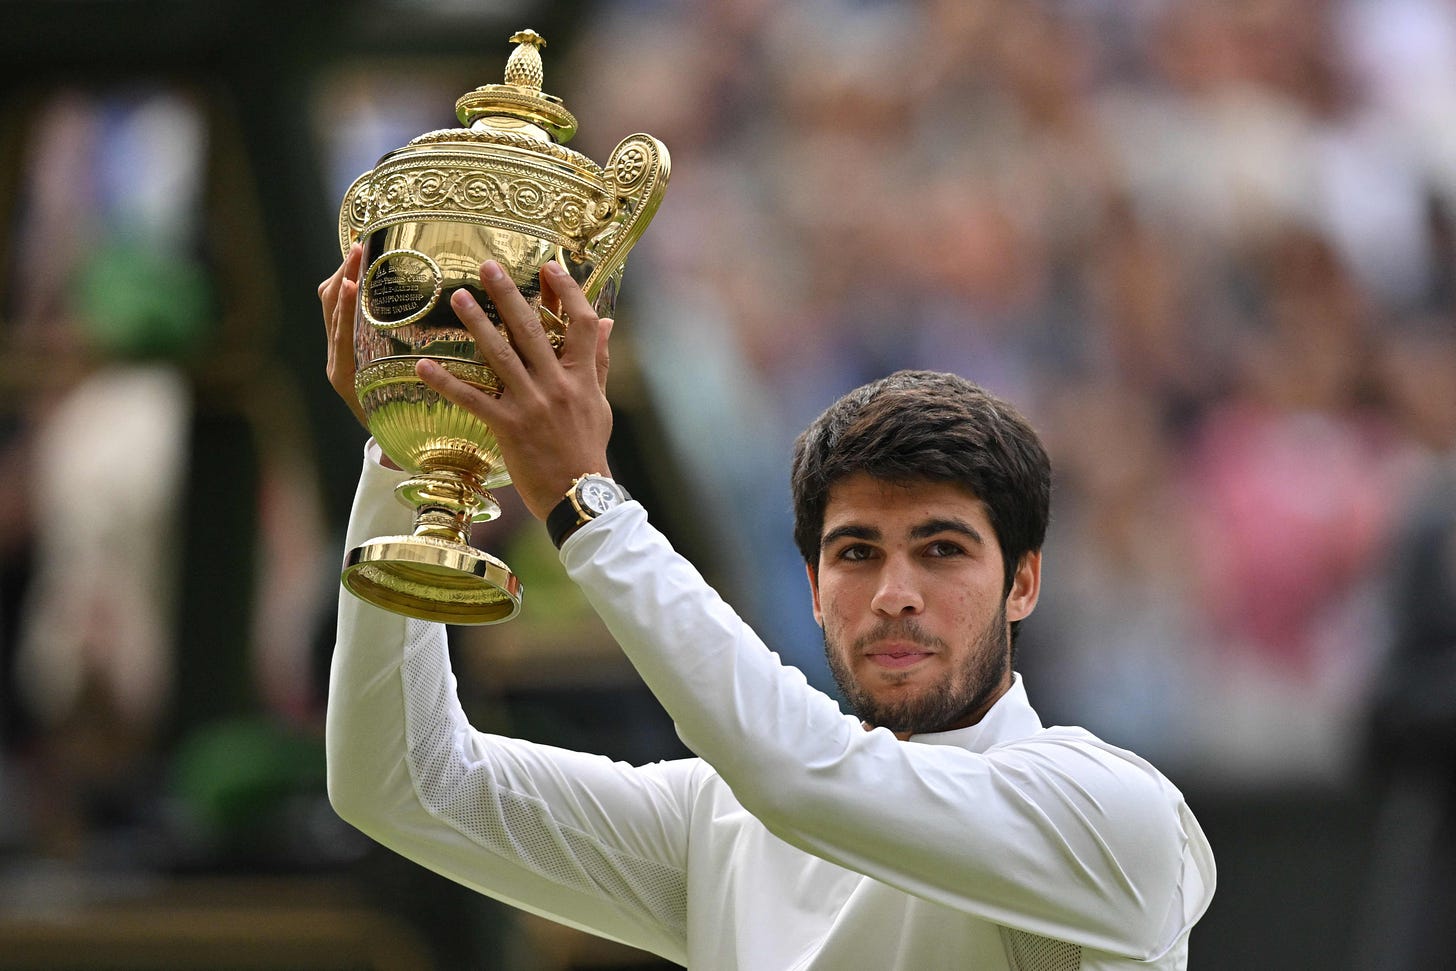 Spain's Carlos Alcaraz raises his trophy after beating Serbia's Novak Djokovic during their men's singles final tennis match on the last day of the 2023 Wimbledon Championships at The All England Tennis Club in Wimbledon, southwest London, on July 16, 2023. (Photo by Glyn KIRK / AFP) / RESTRICTED TO EDITORIAL USE